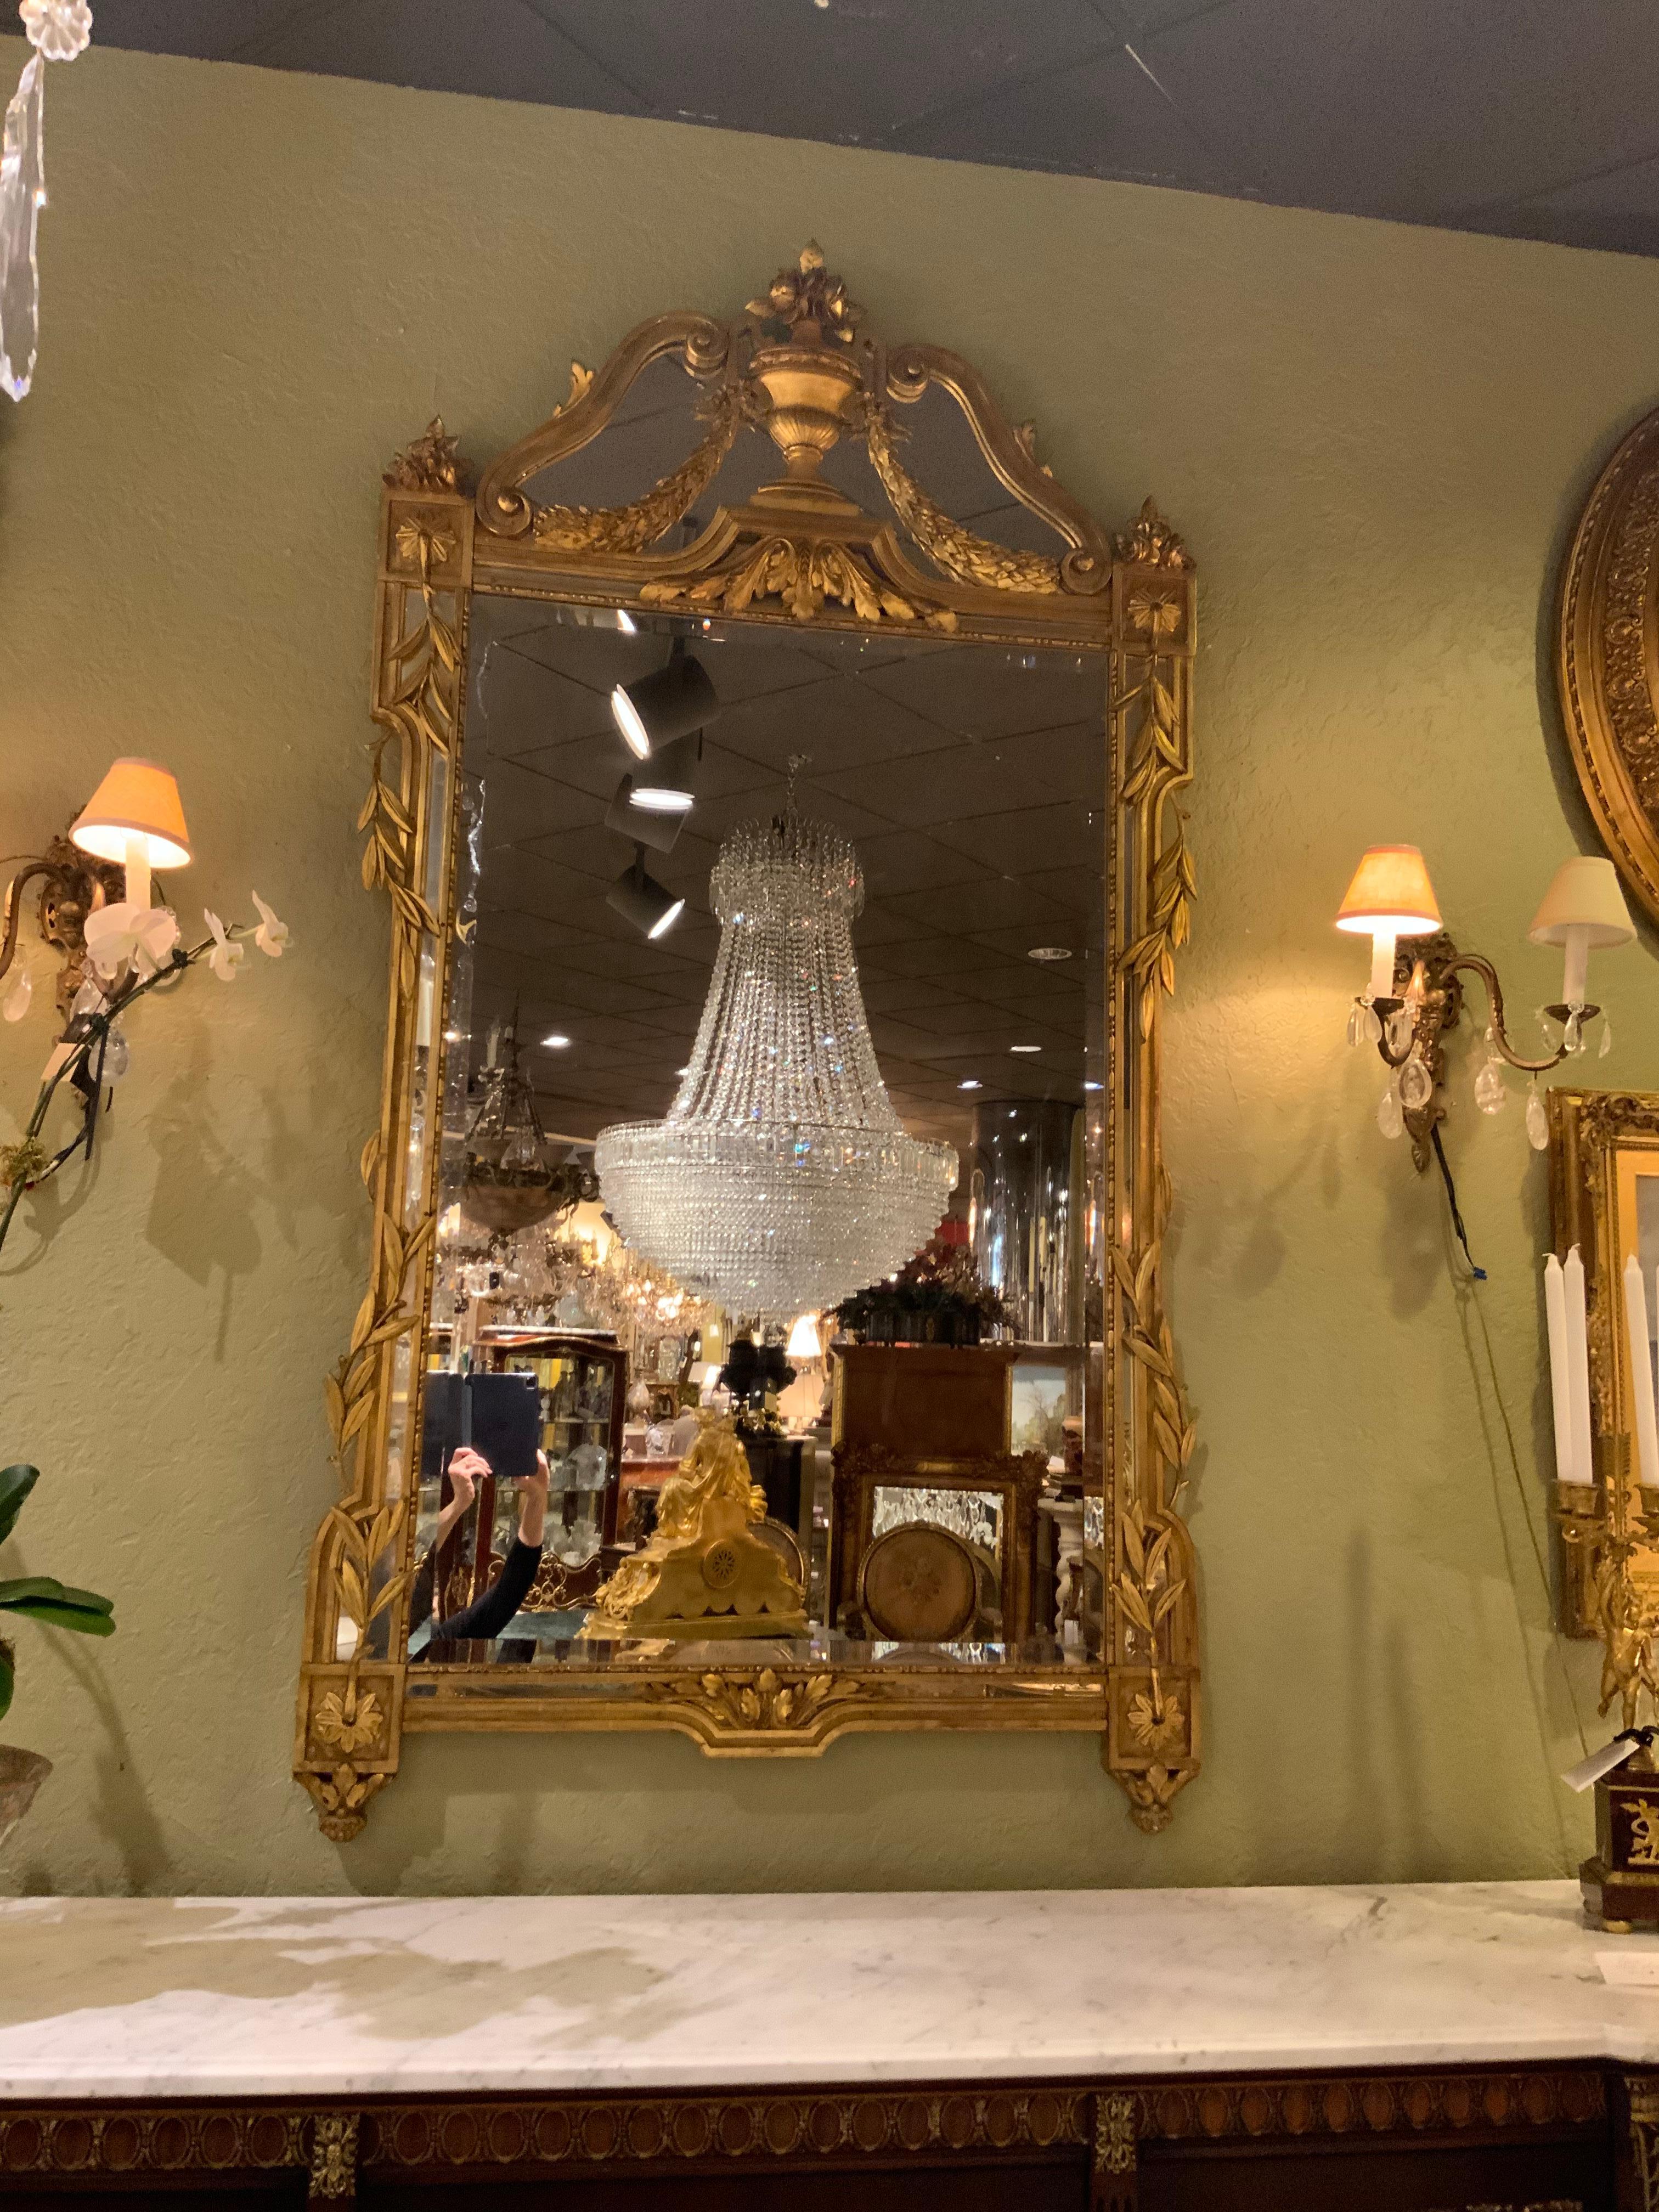 Giltwood mirror with original gilding having a leaf design on each side trailing
Vertically. A large urn is centered at the top with a floral motif at the top crest.